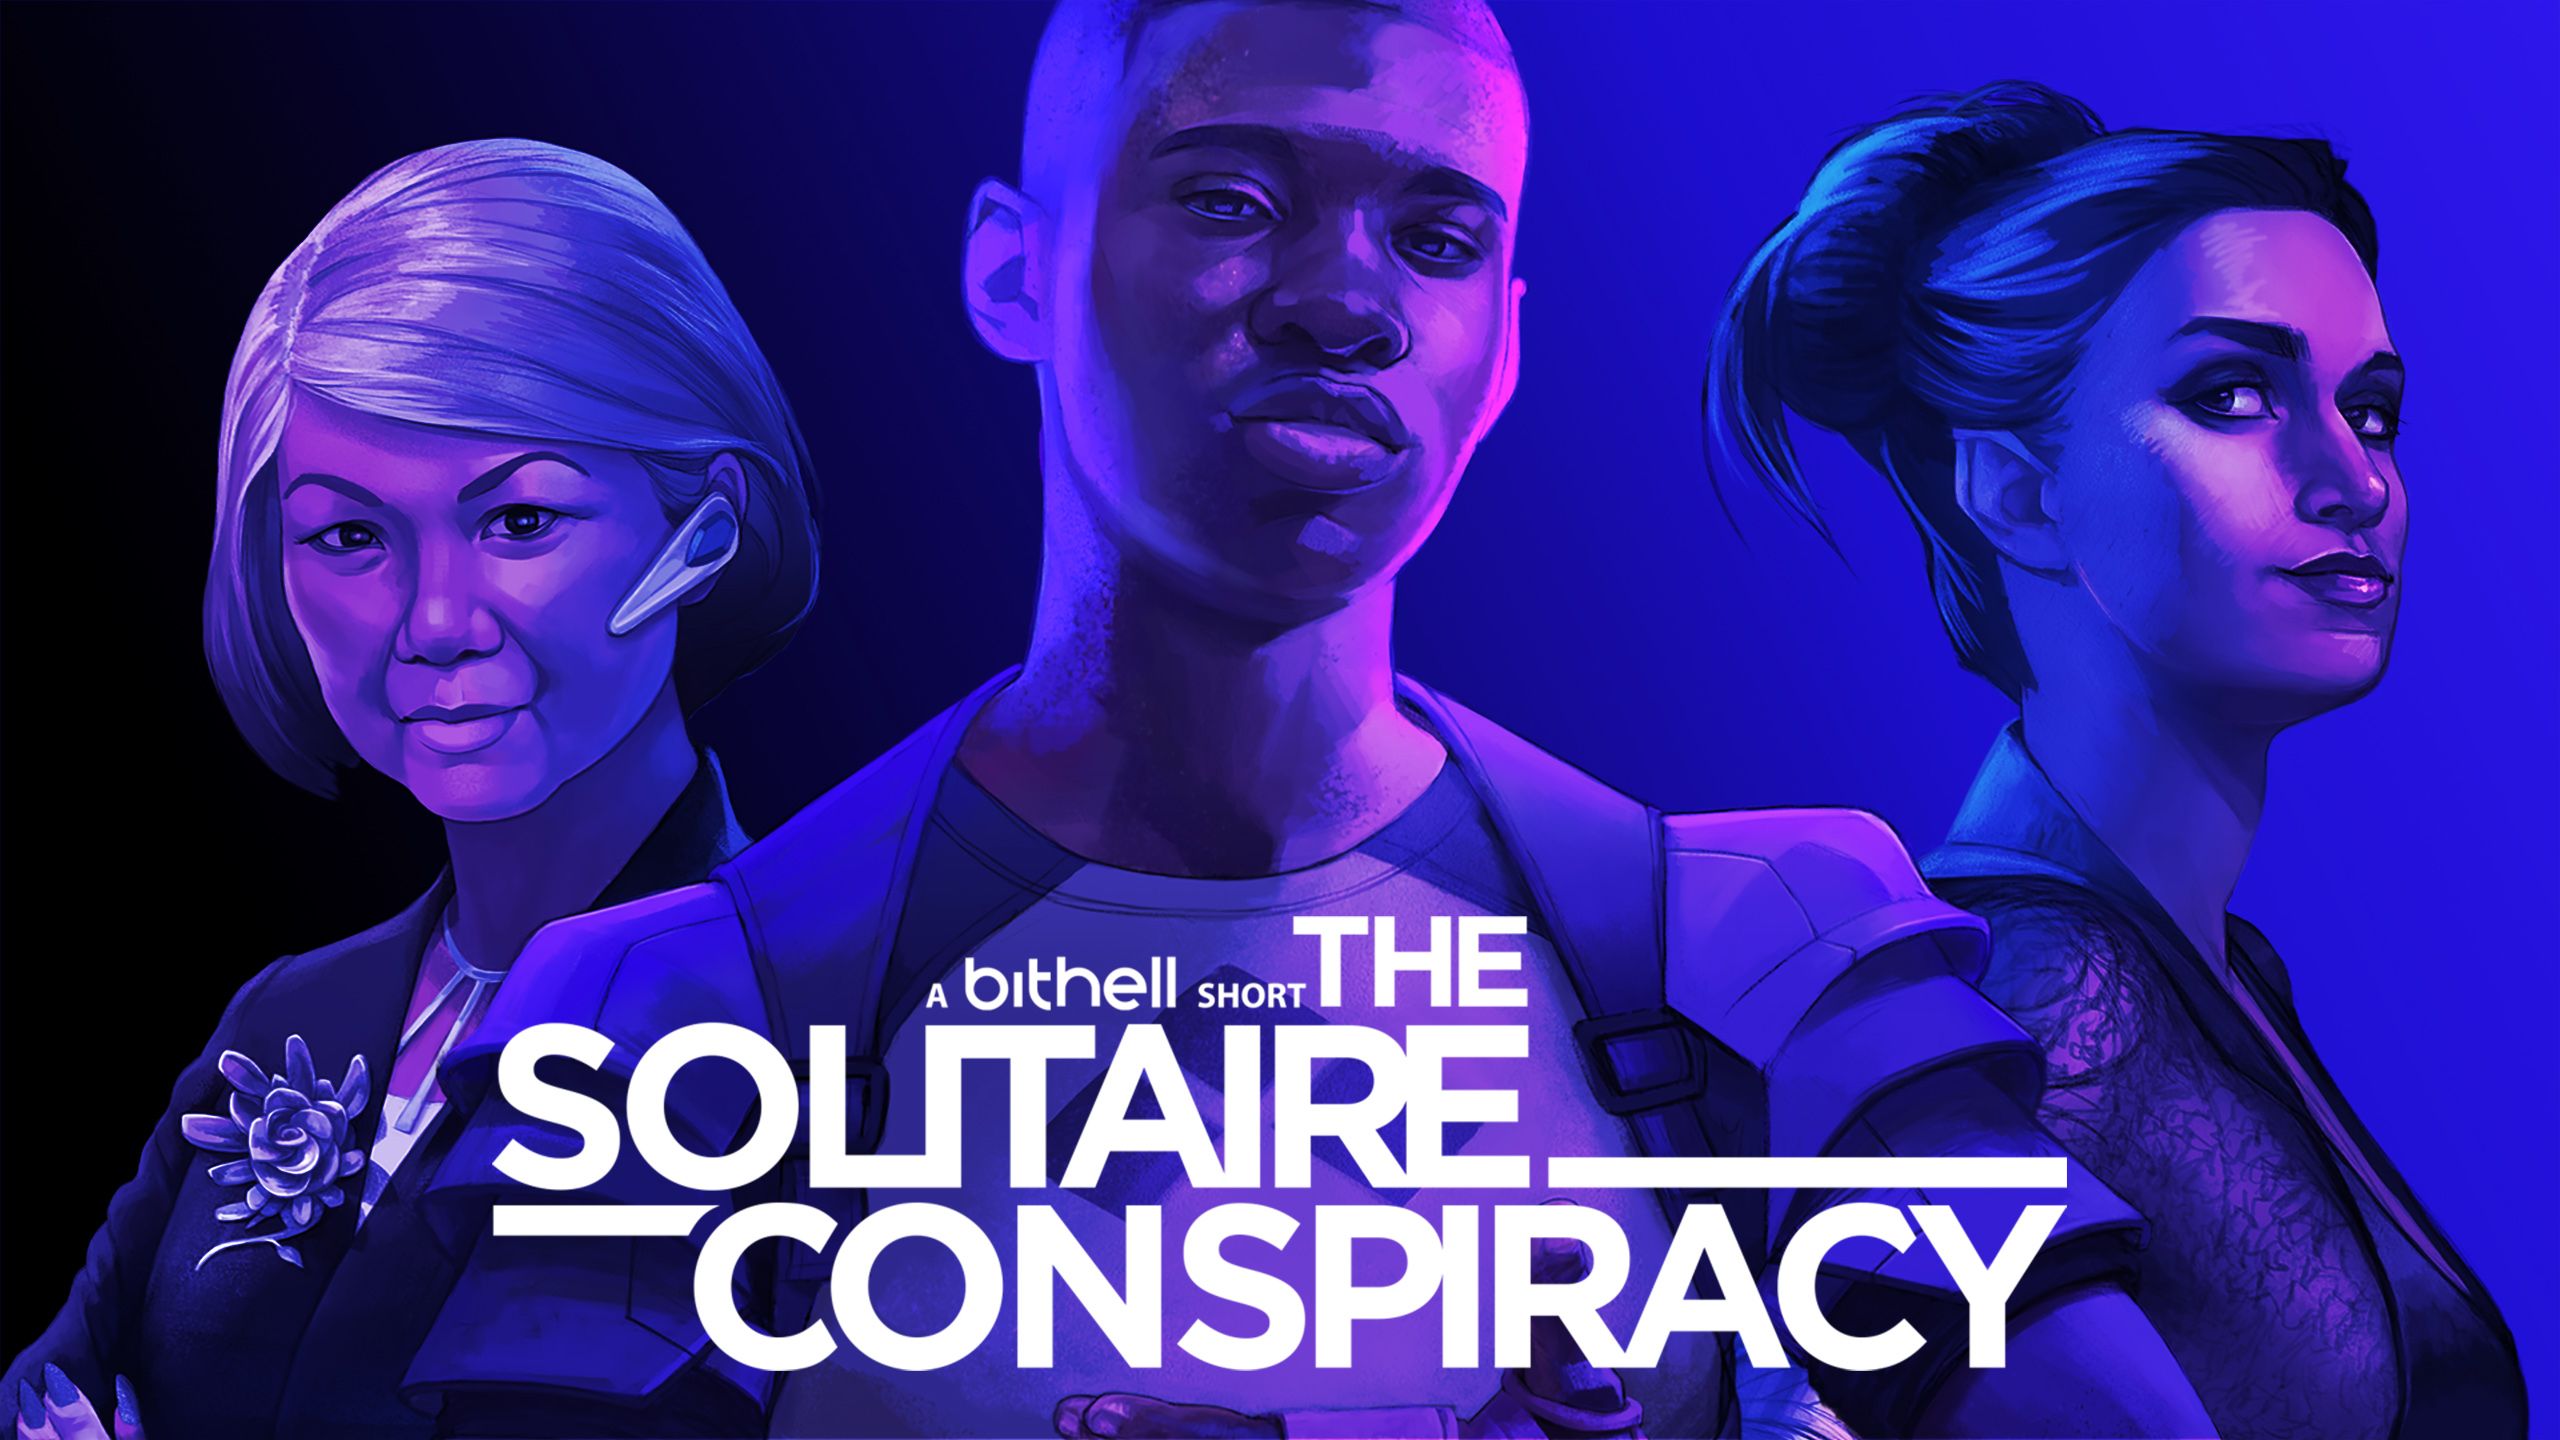 Bithell Games Announces The Solitaire Conspiracy, A Story Driven Solitaire FMV Game